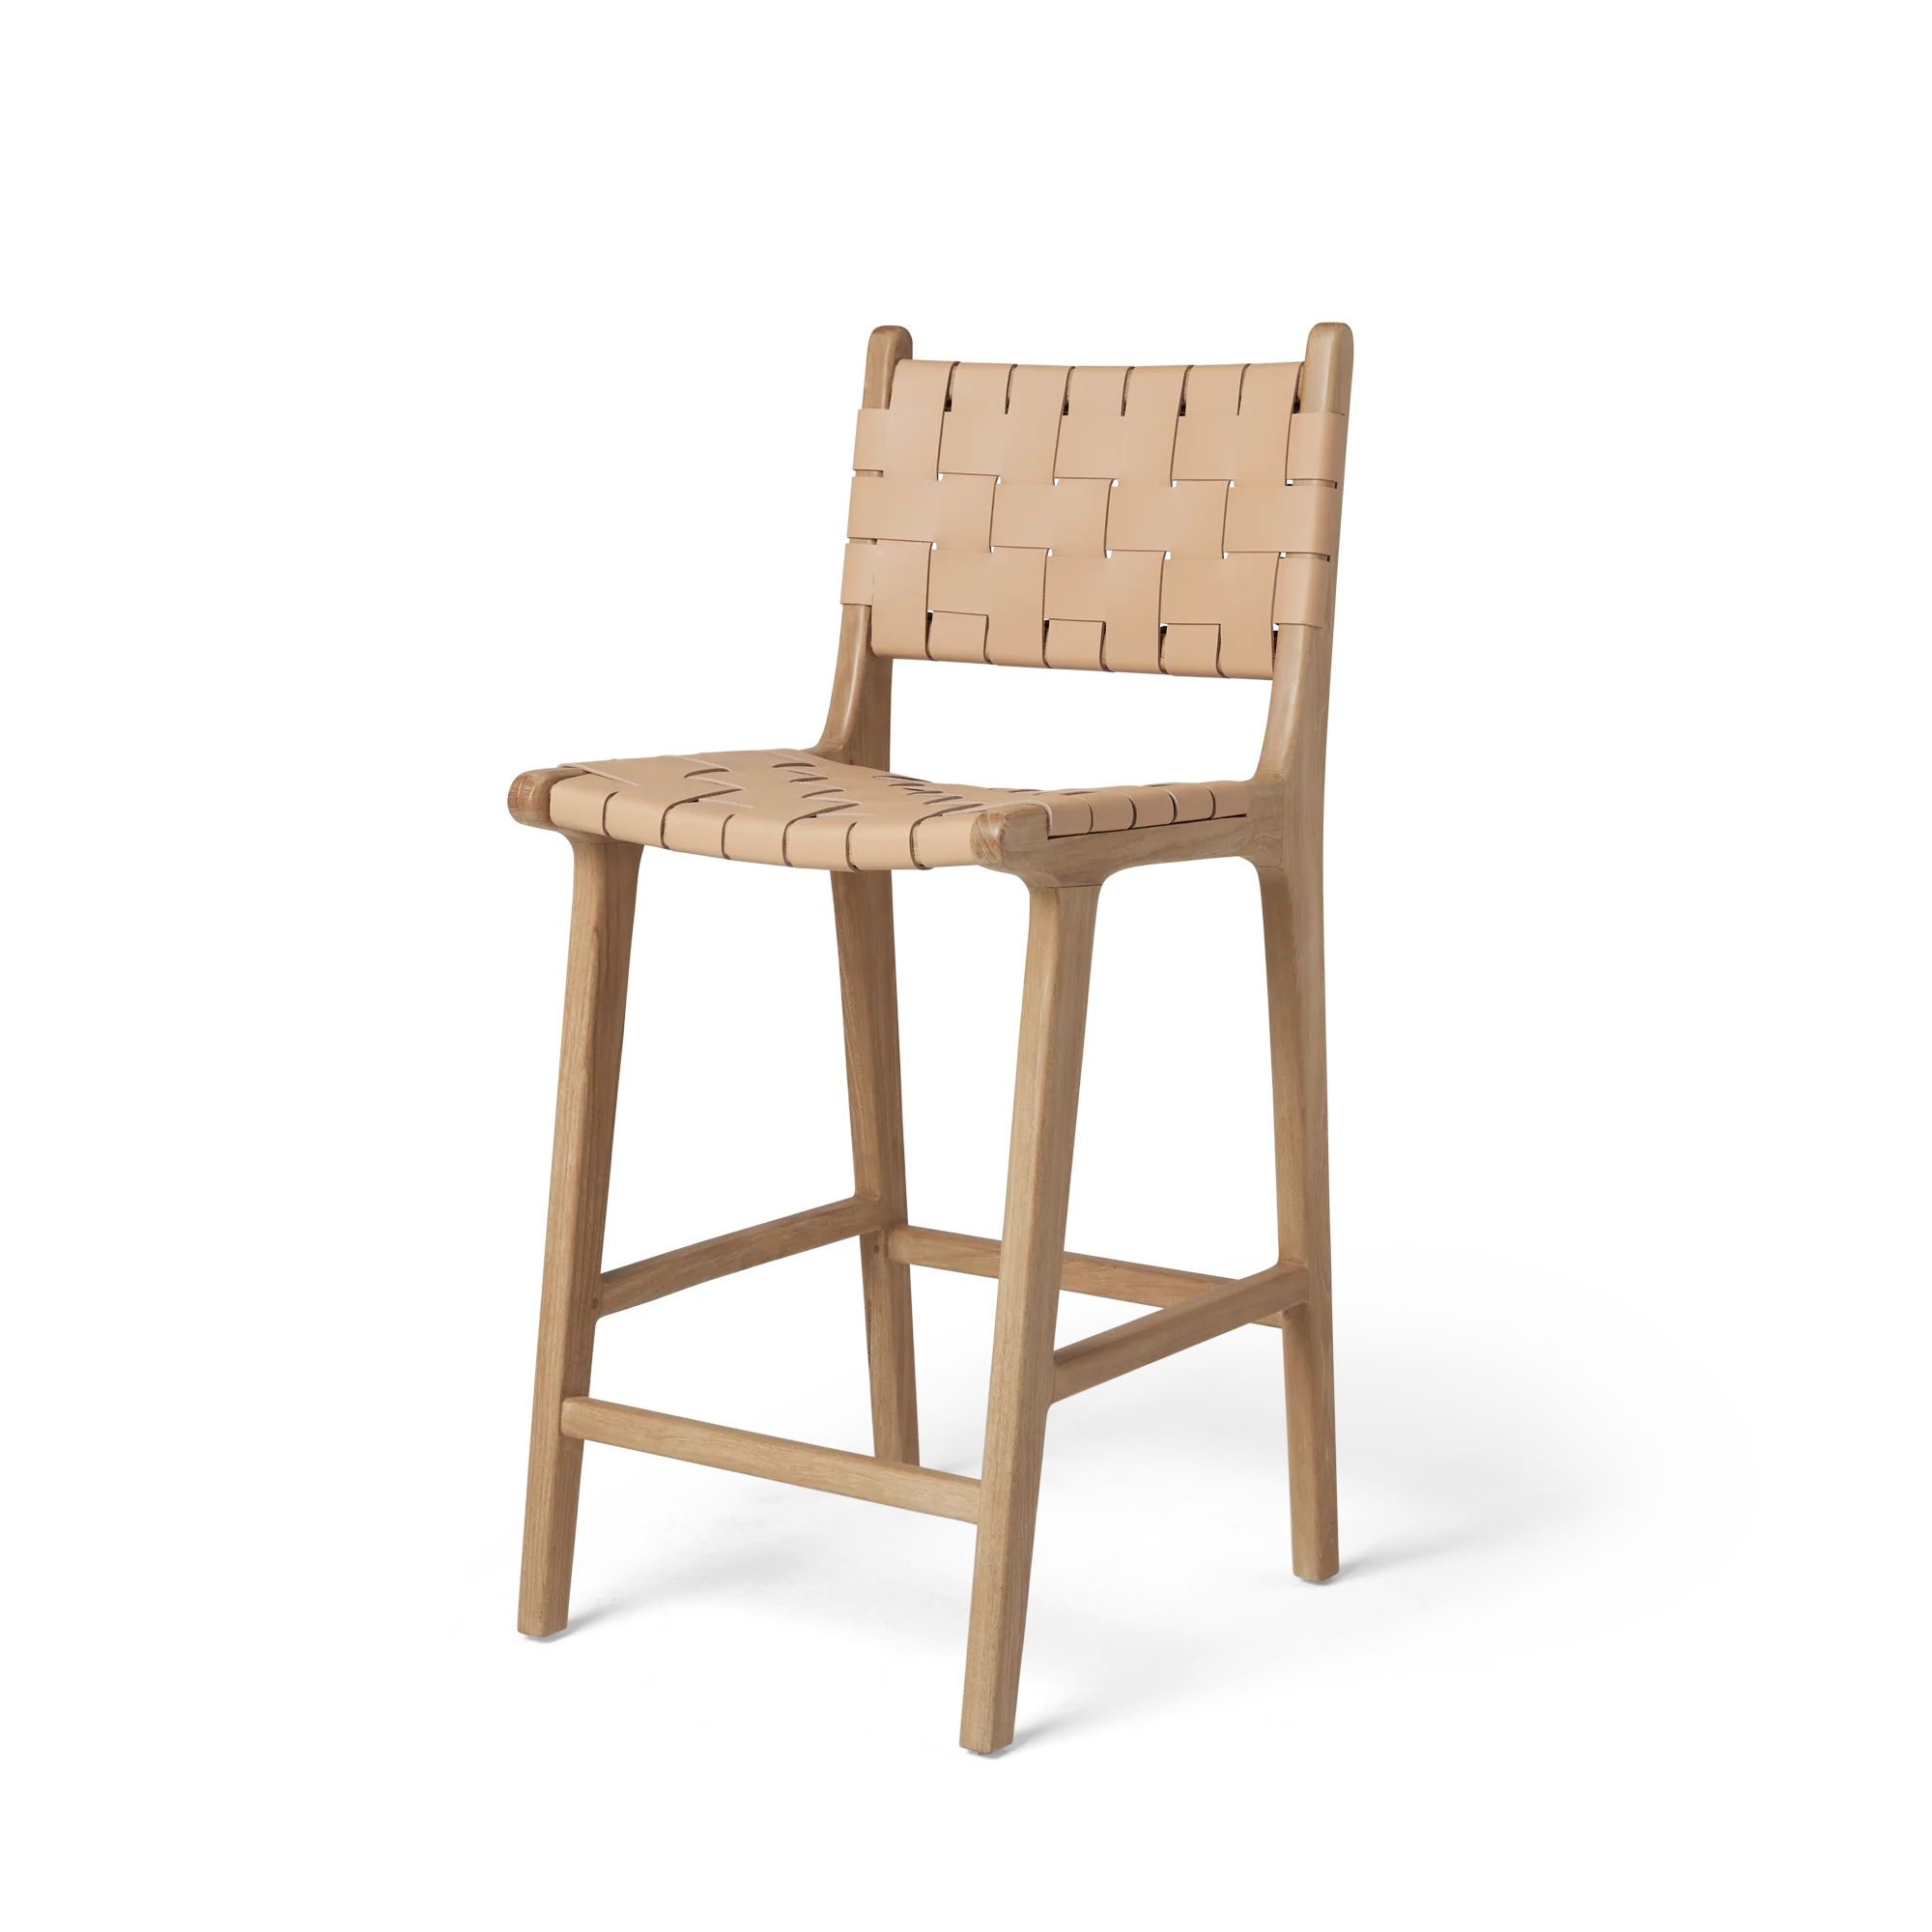 Stool #2 - Counter Stool in Teak with Woven Neutral Leather | Hati Home